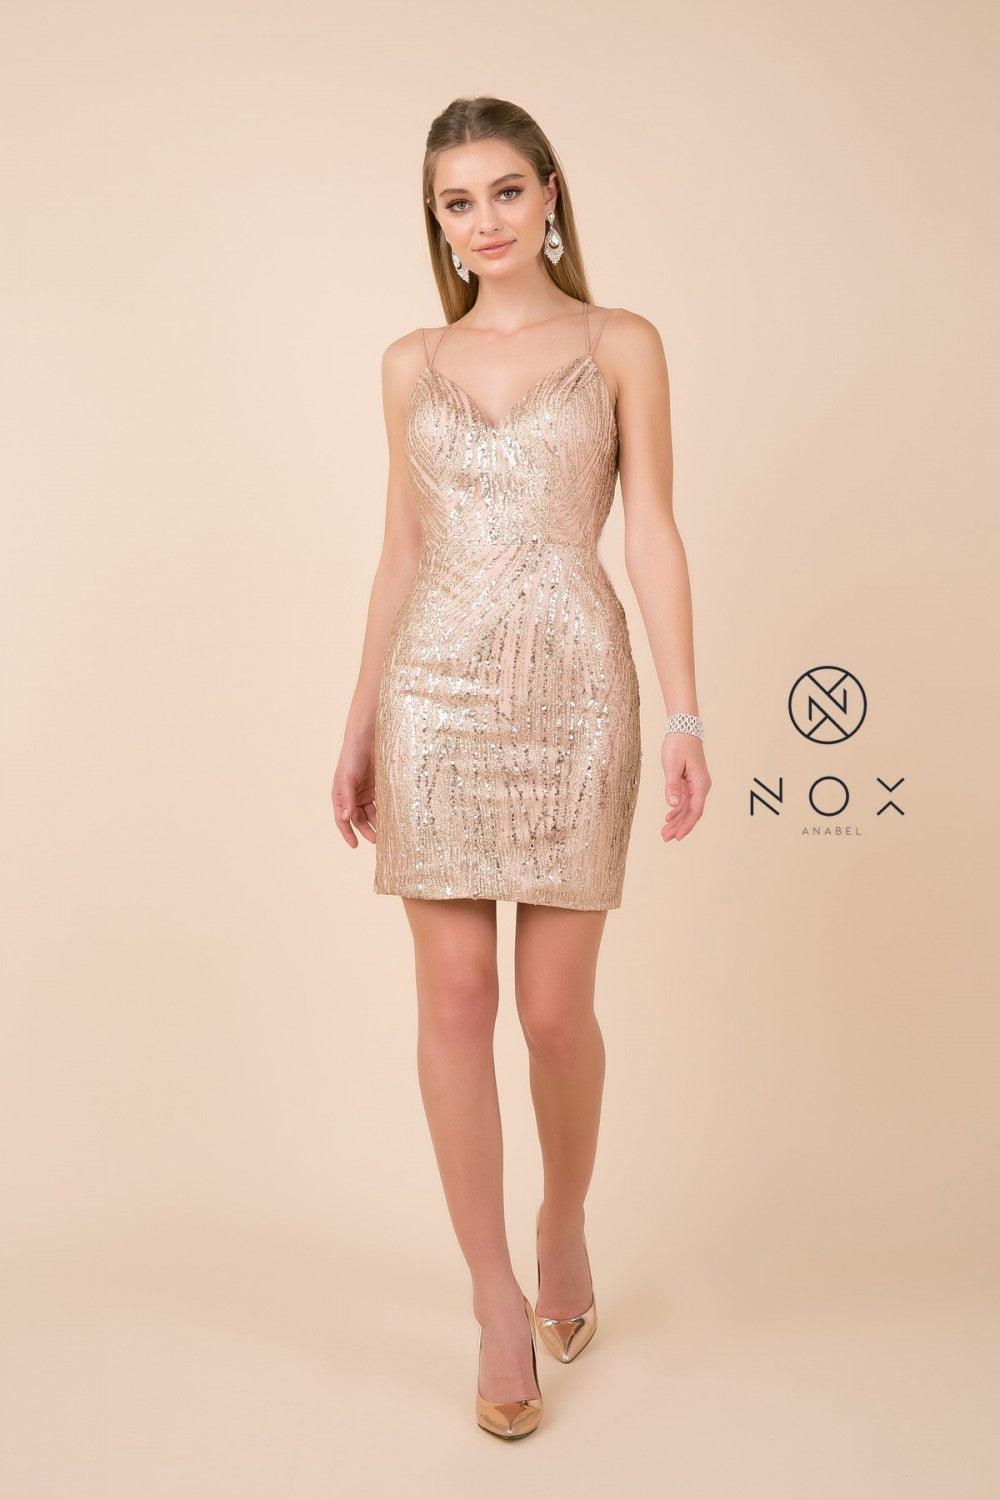 Sexy Short Fitted Prom Dress Cocktail - The Dress Outlet Nox Anabel